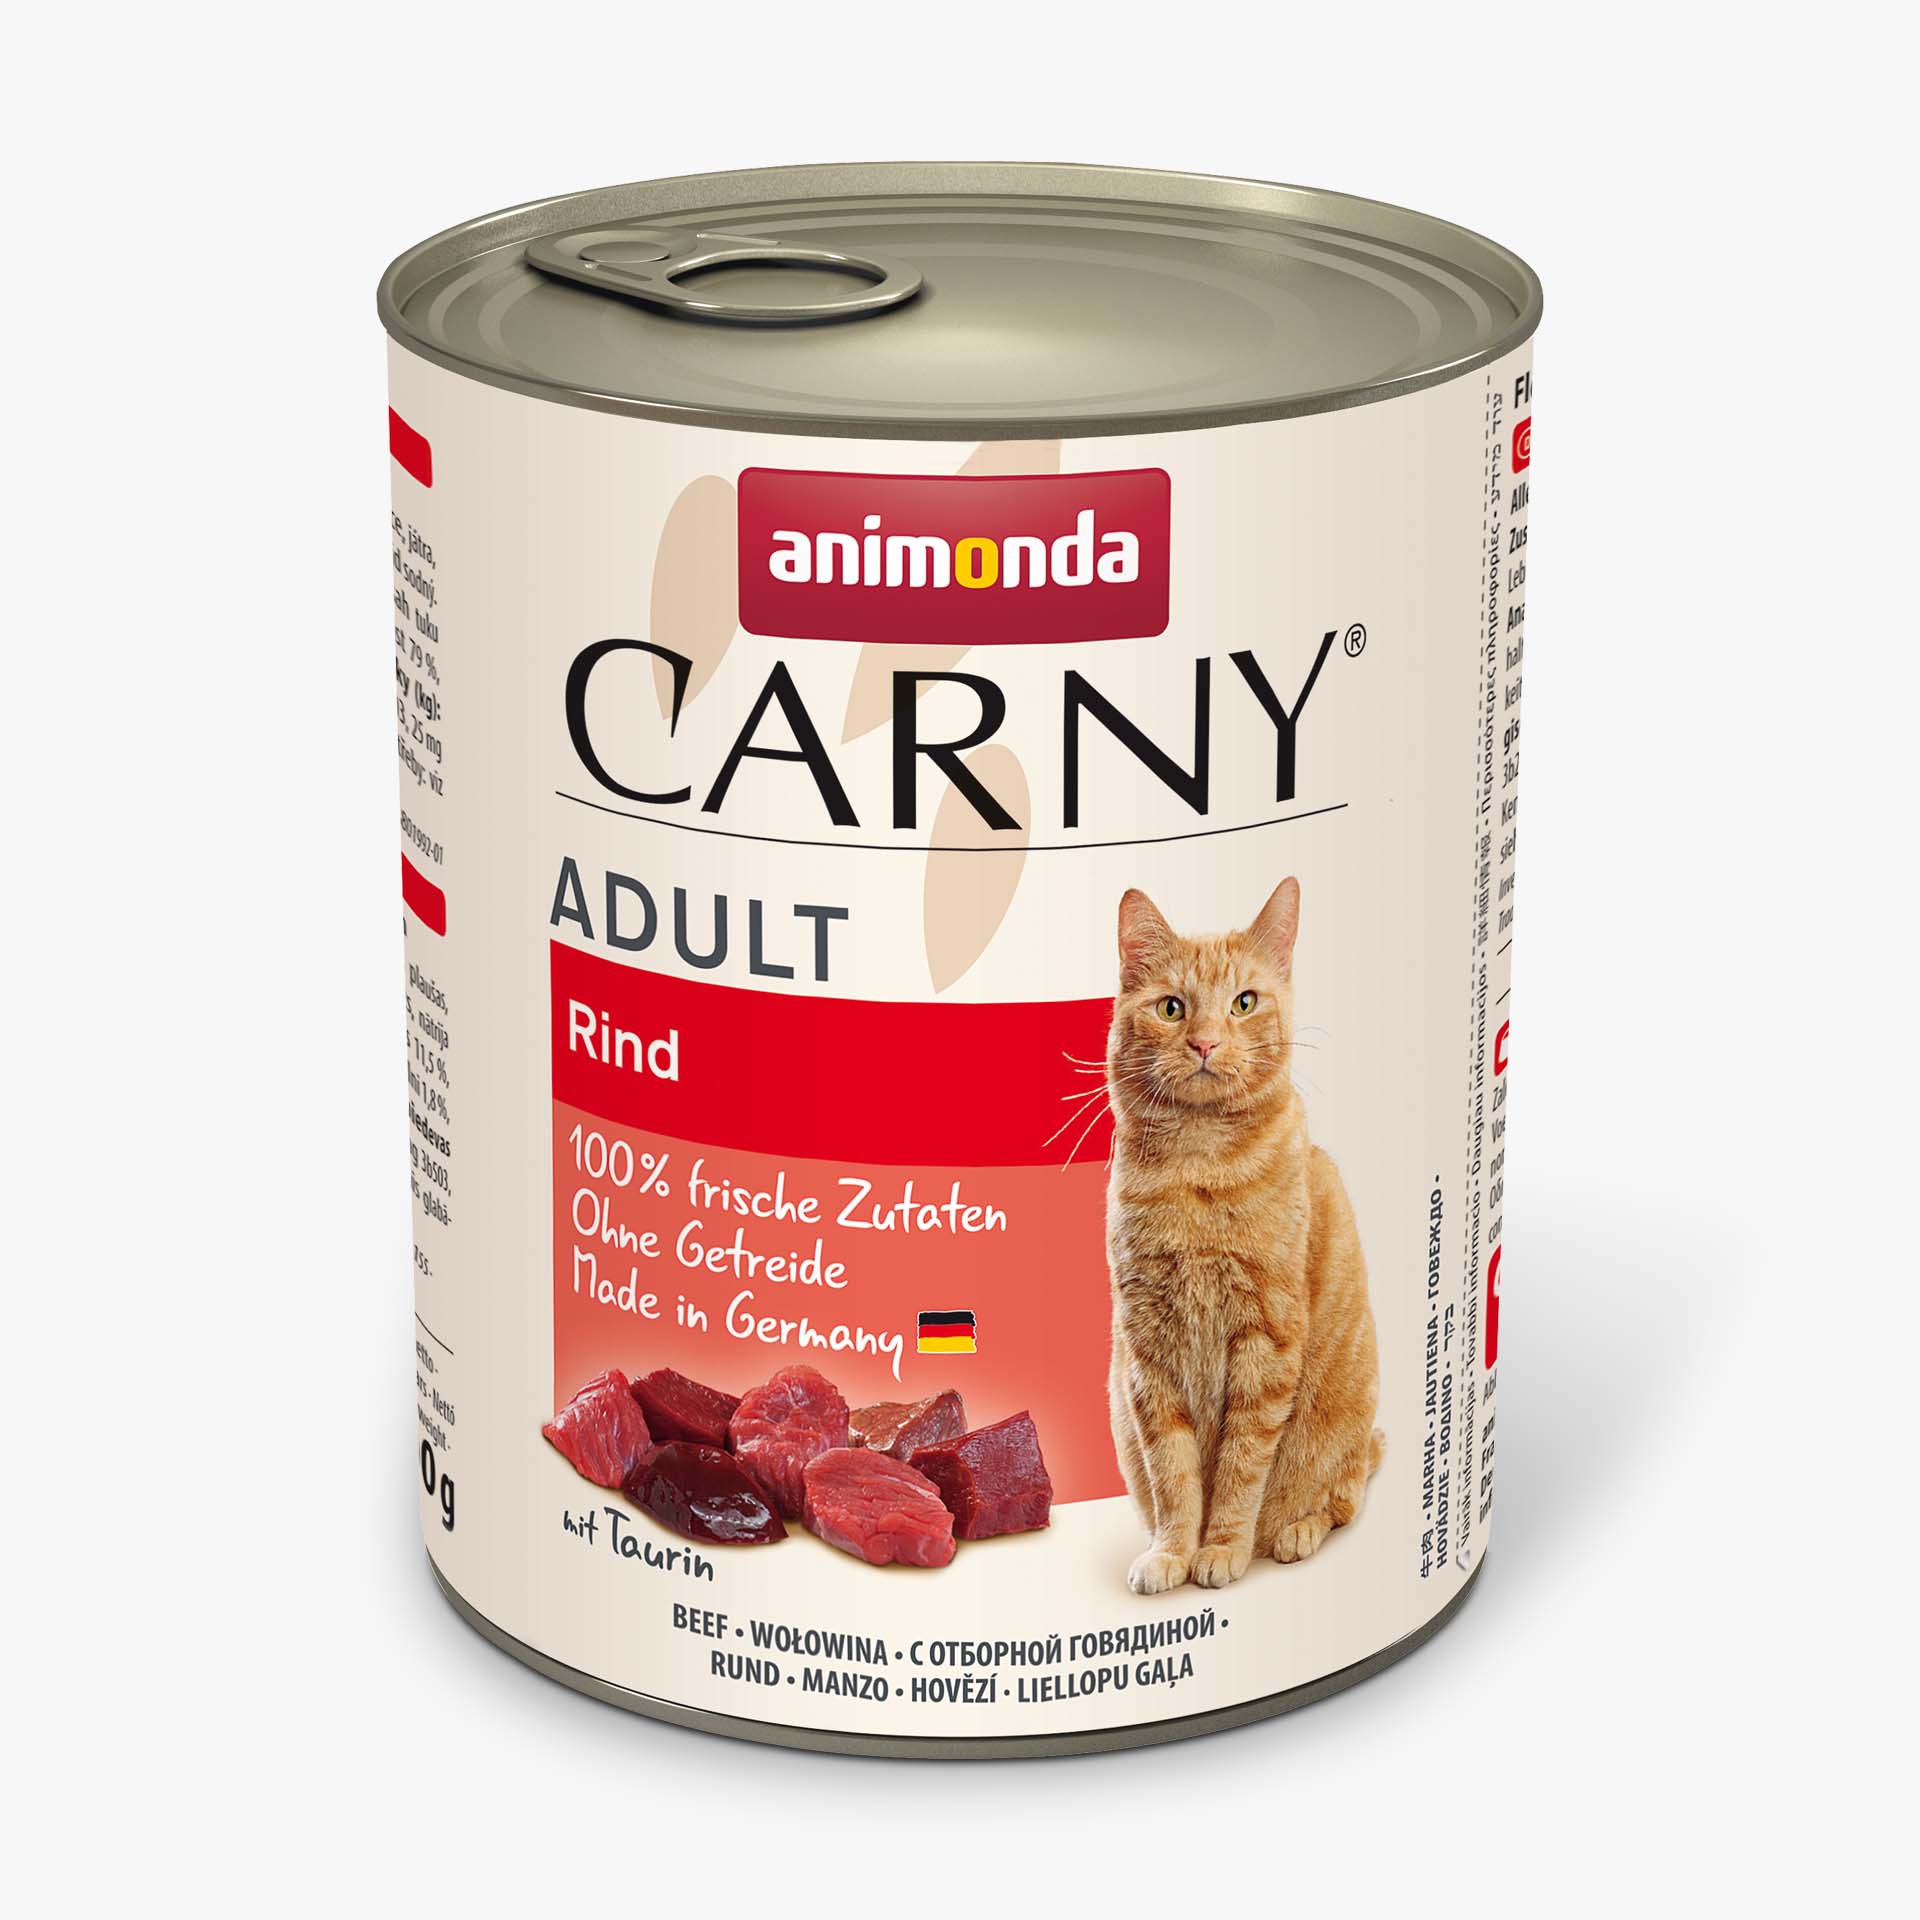 Carny Adult Rind